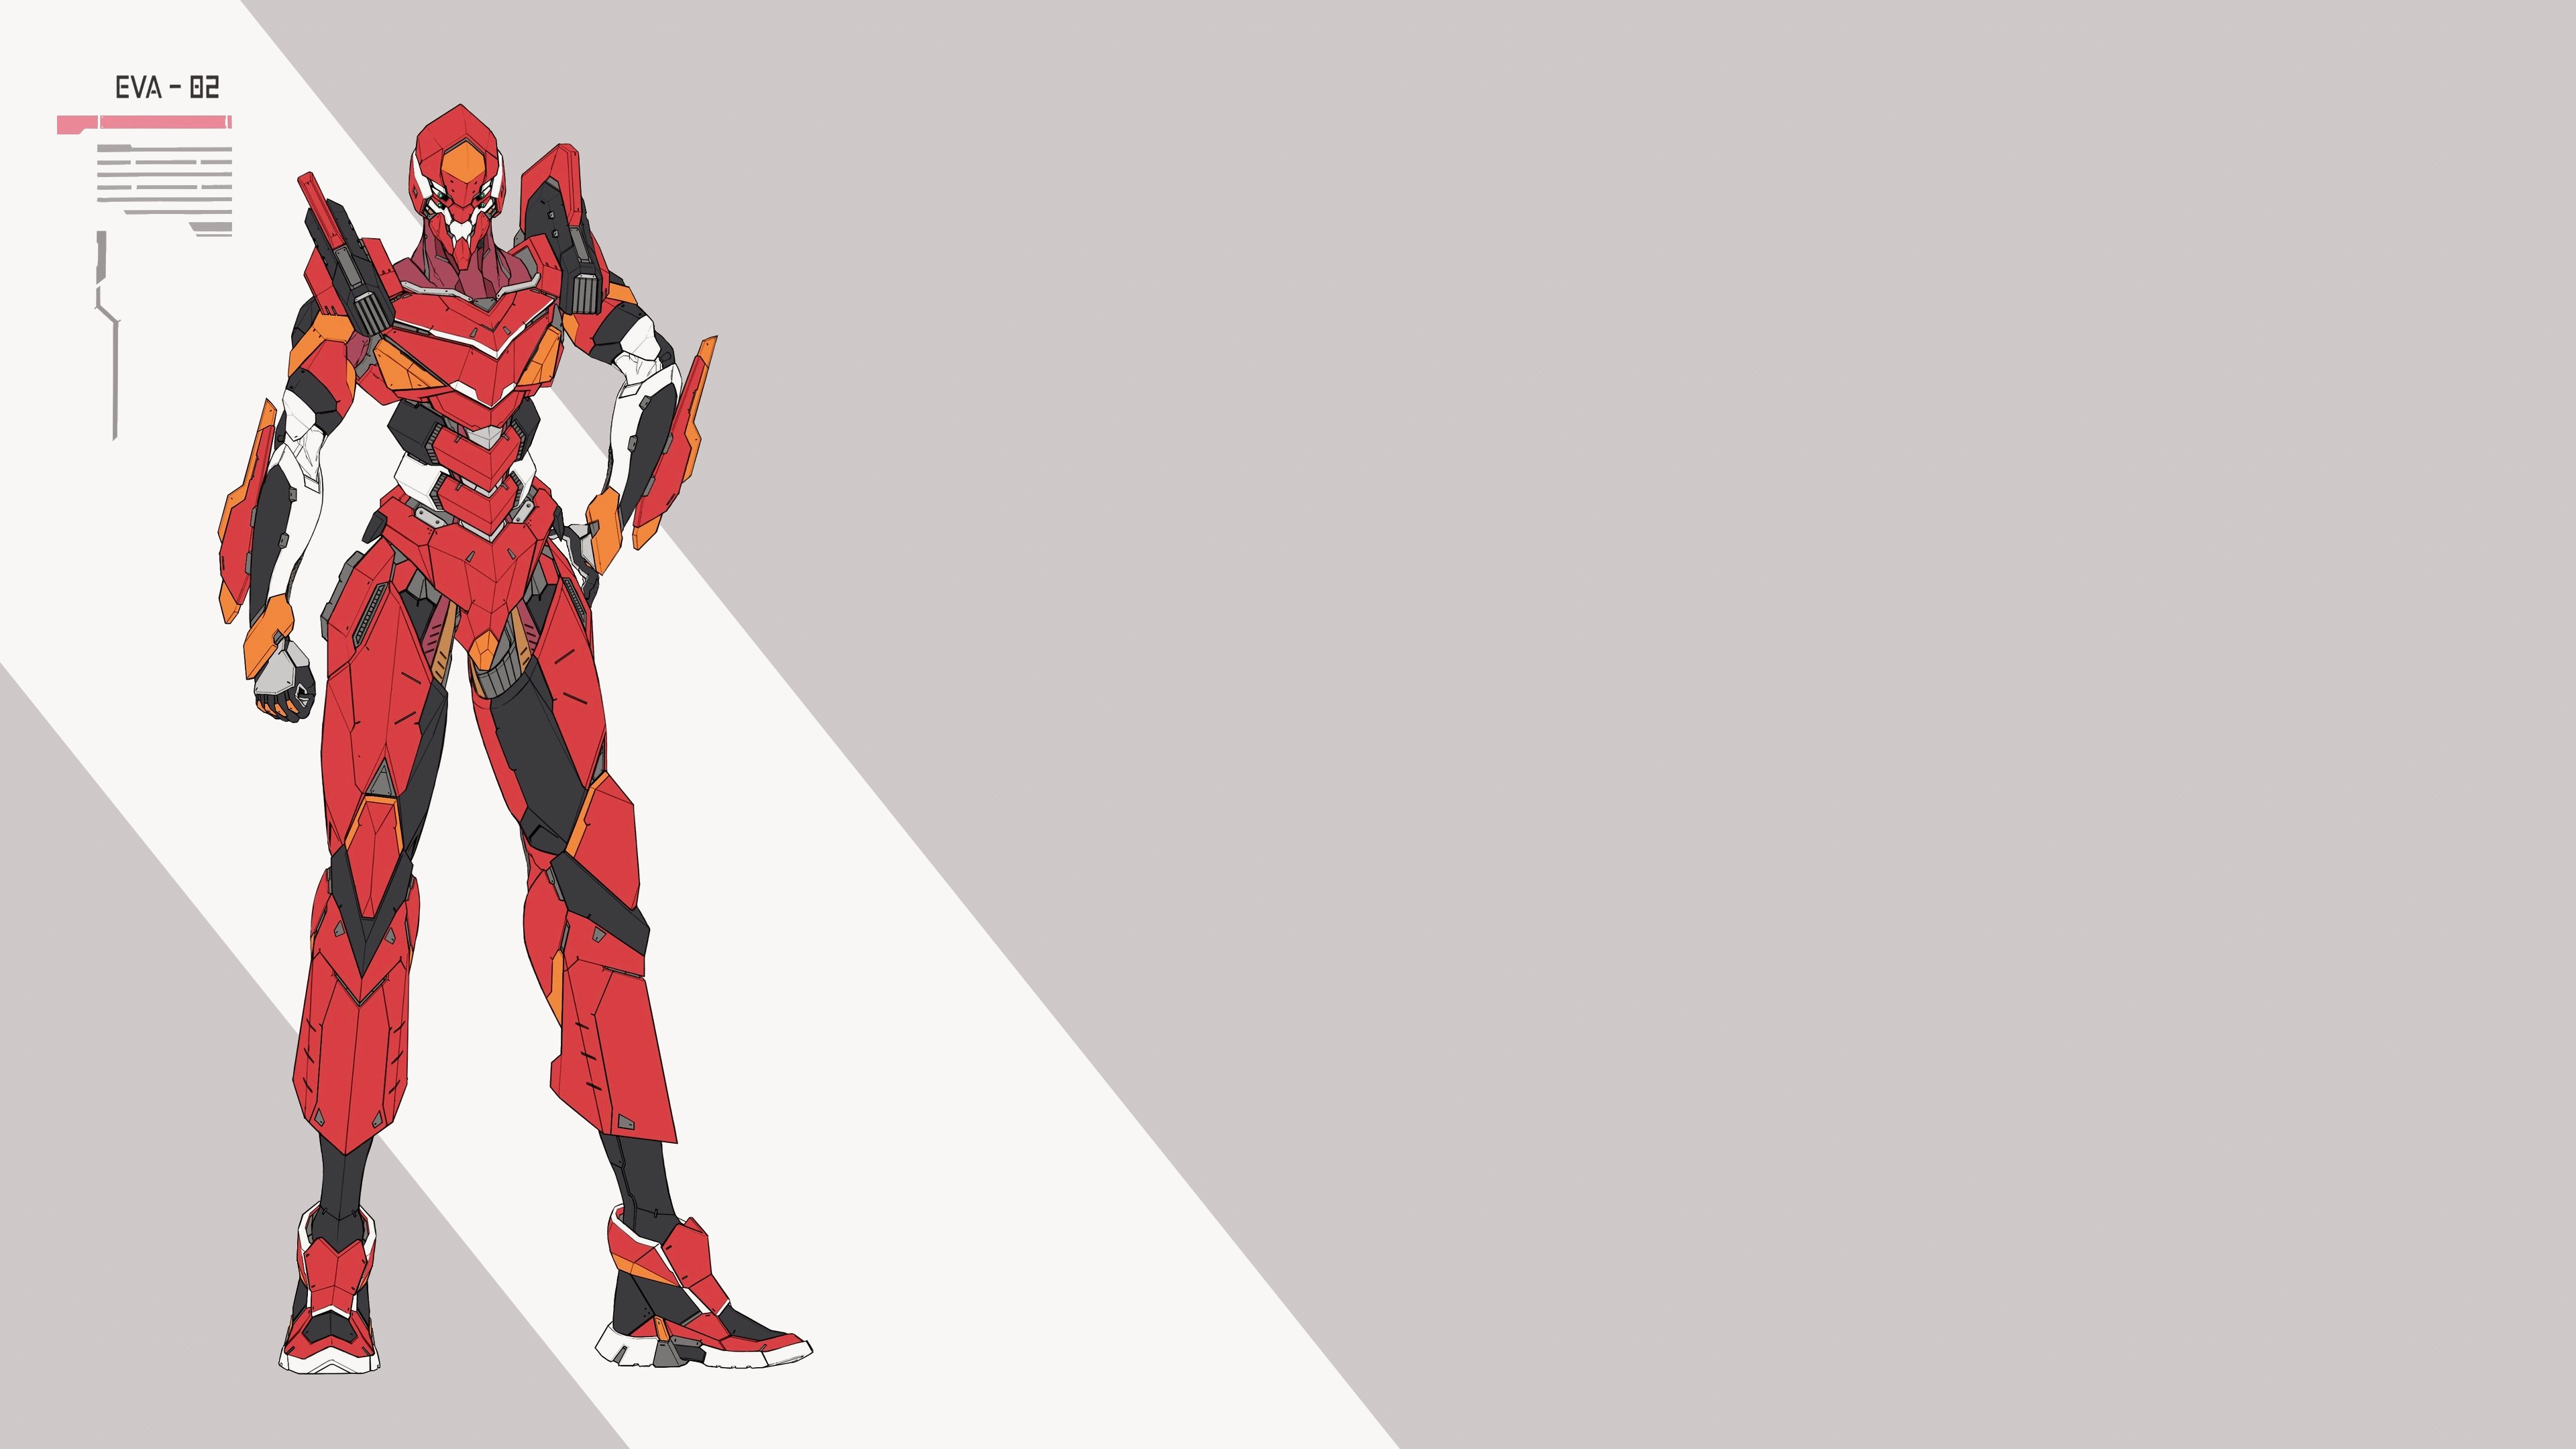 Anime 3840x2160 Neon Genesis Evangelion fan art EVA Unit 02 mechs robot hands on hips simple background anime text redesigned gray background armor